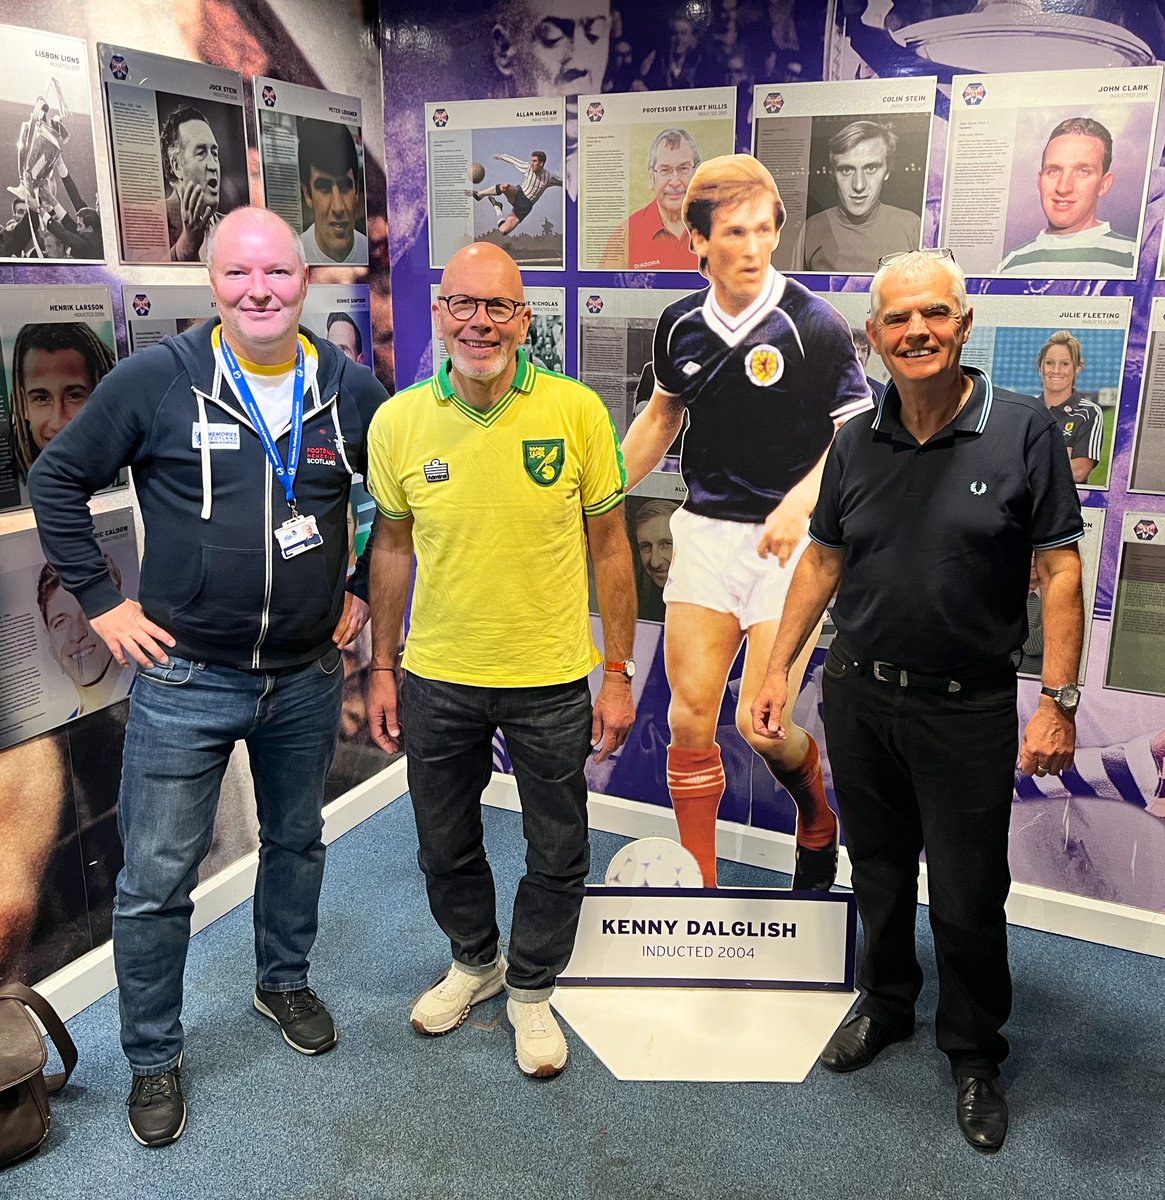 A superb turnout @HampdenPark for a special talk from @robinHEG on the commercialisation of football & Scottish connections to his beloved @NorwichCityFC. Thank you for joining us Robin!